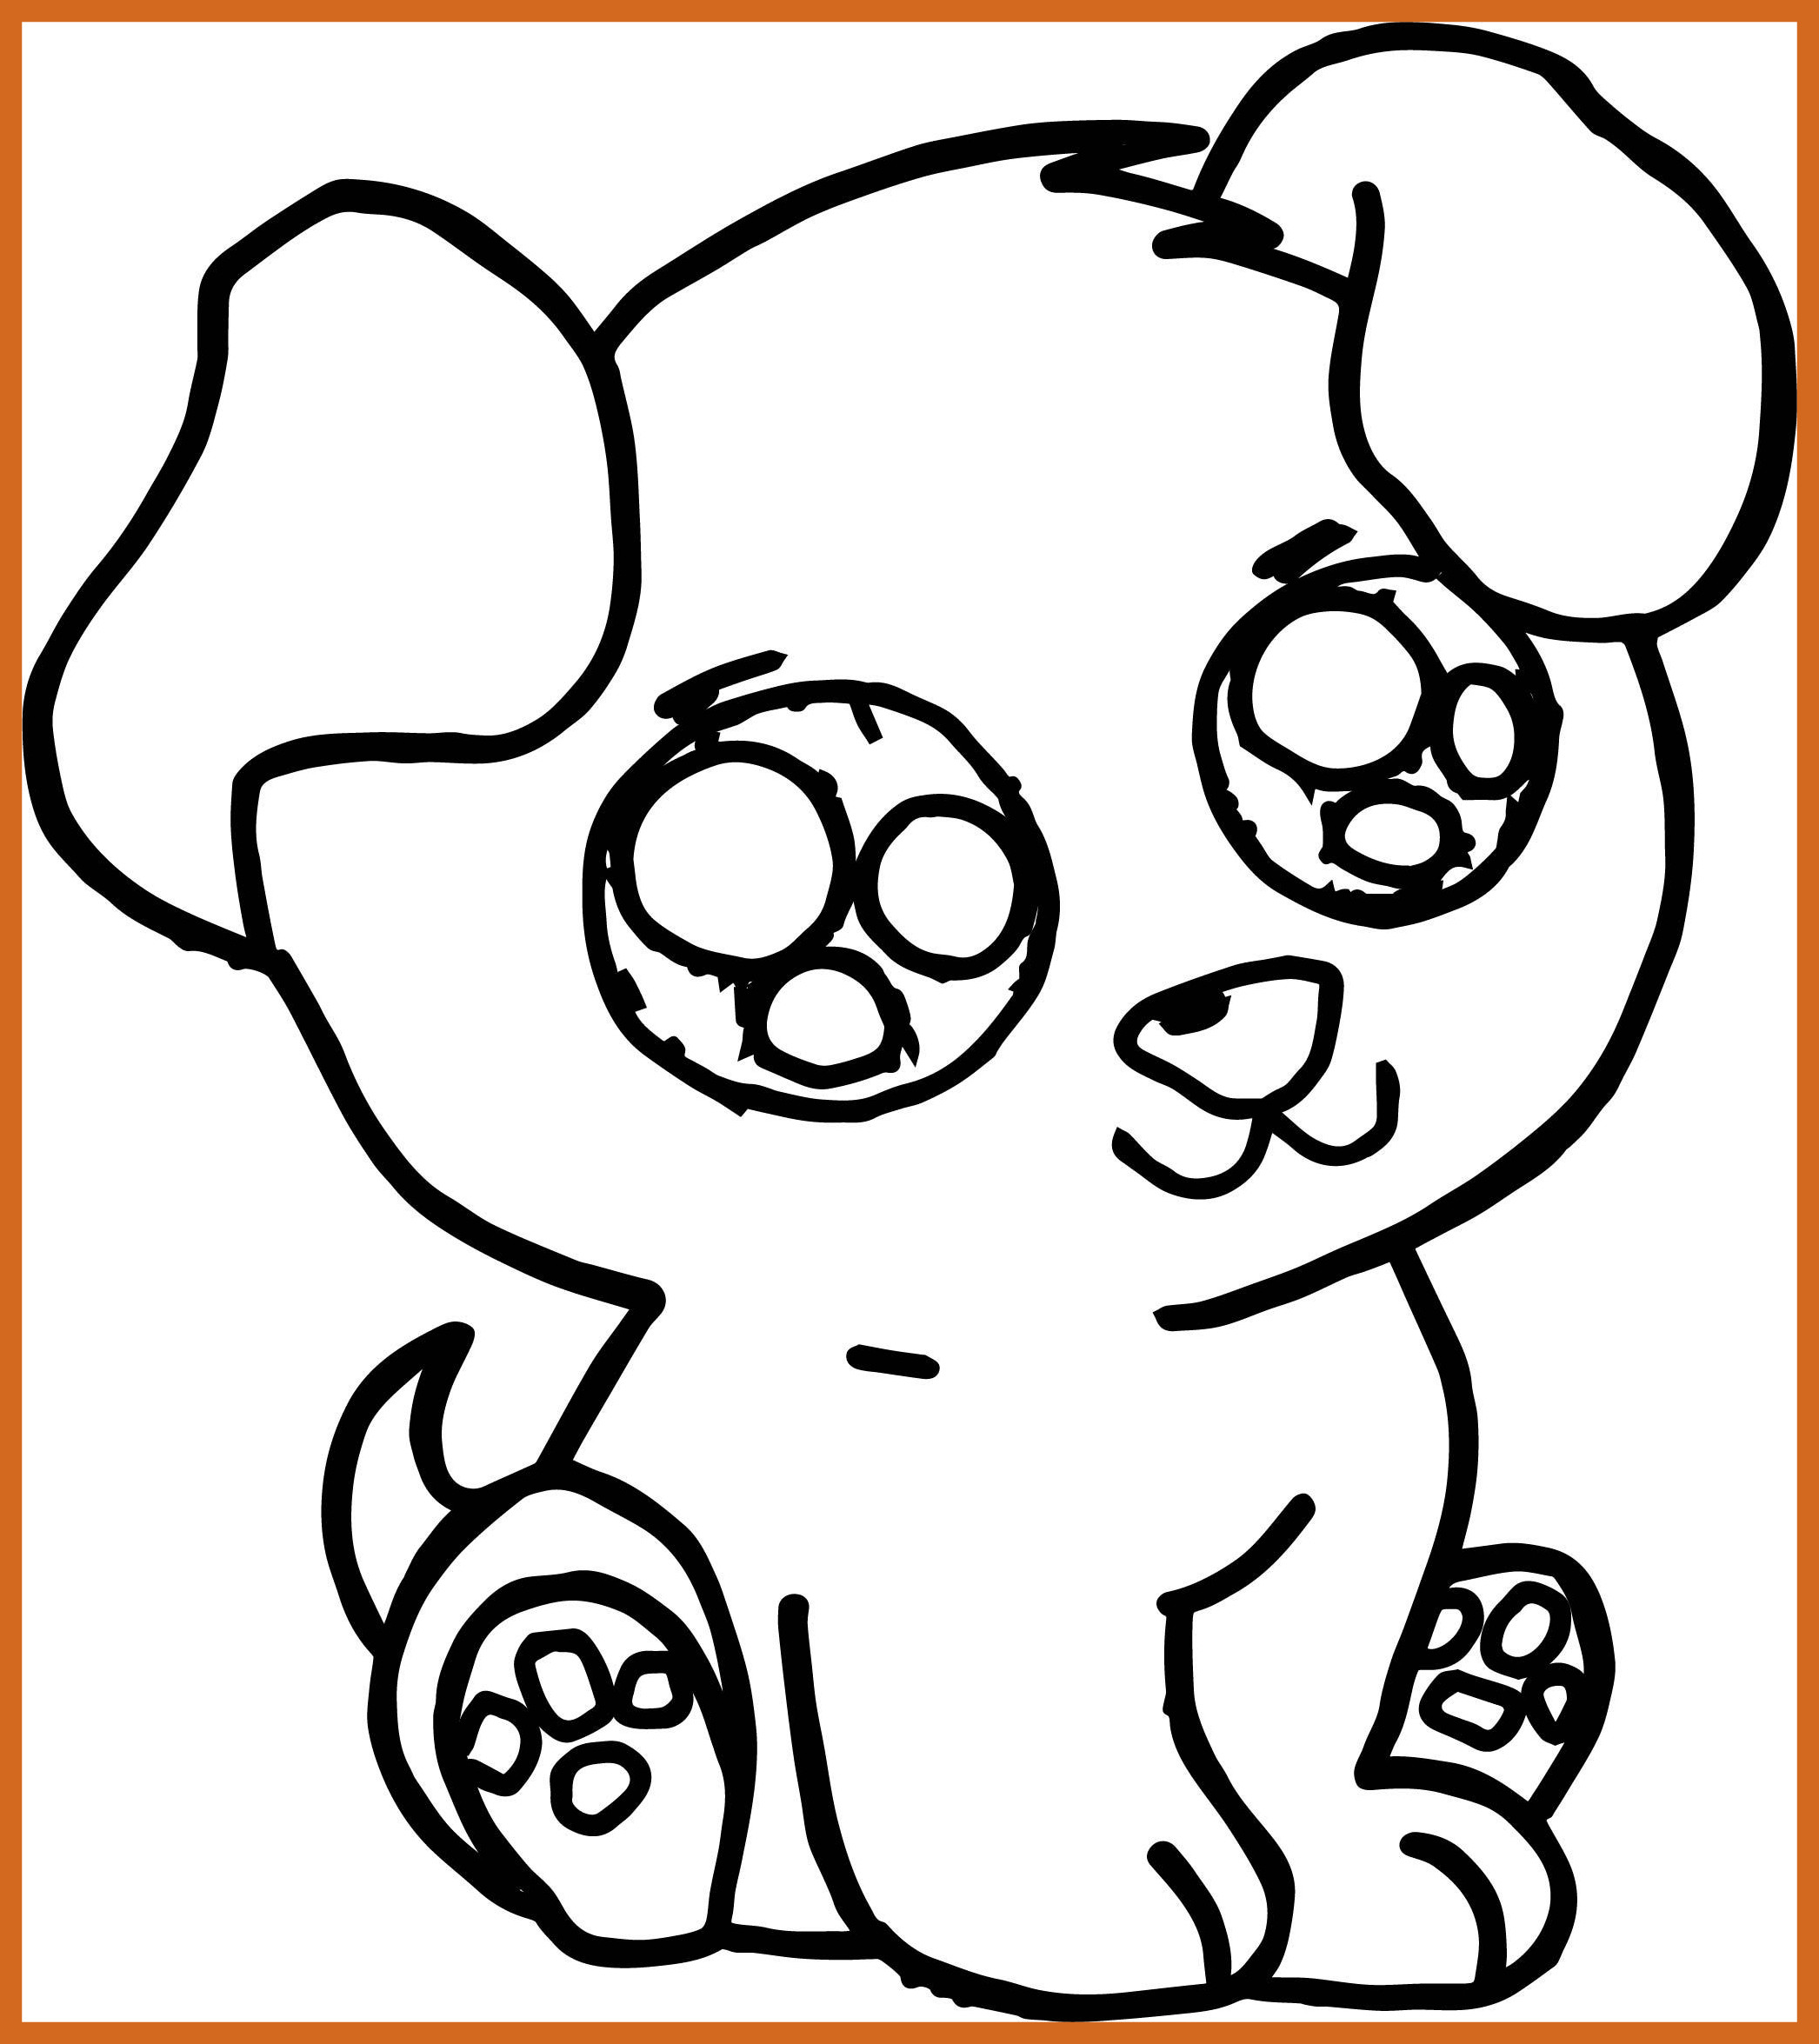 Dog Coloring Pages At GetColorings Free Printable Colorings Pages 